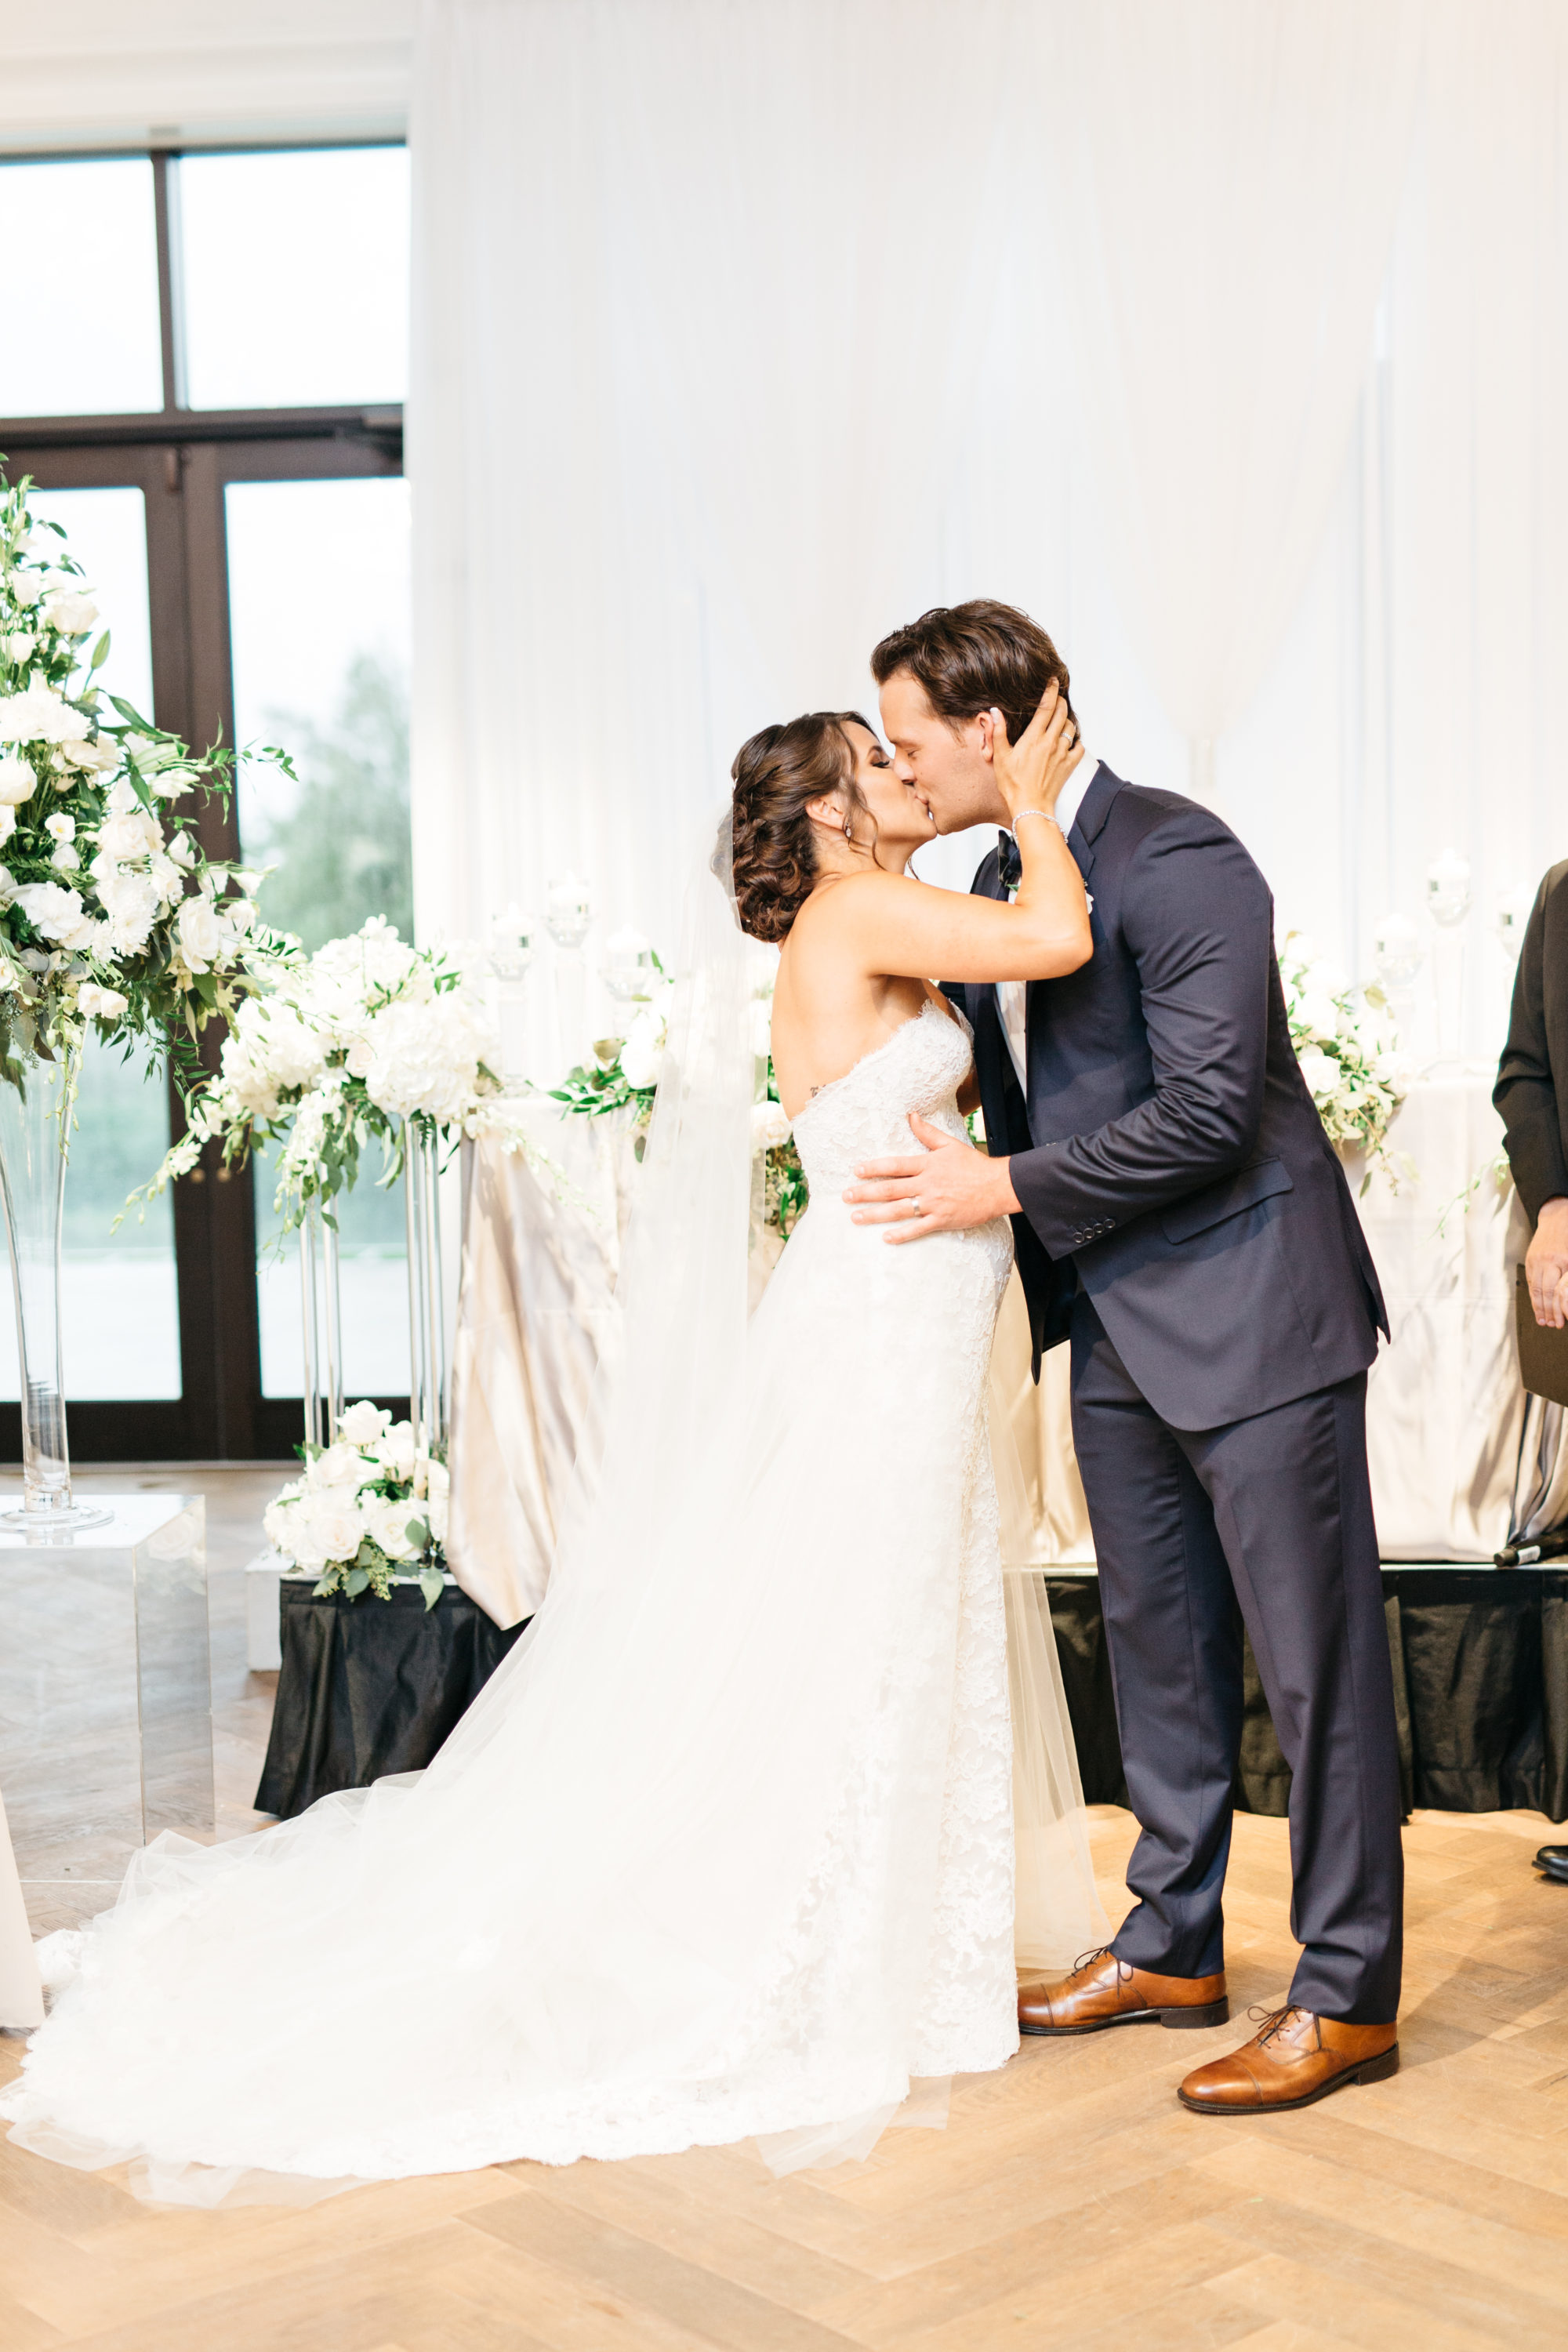 The bride and grooms first kiss